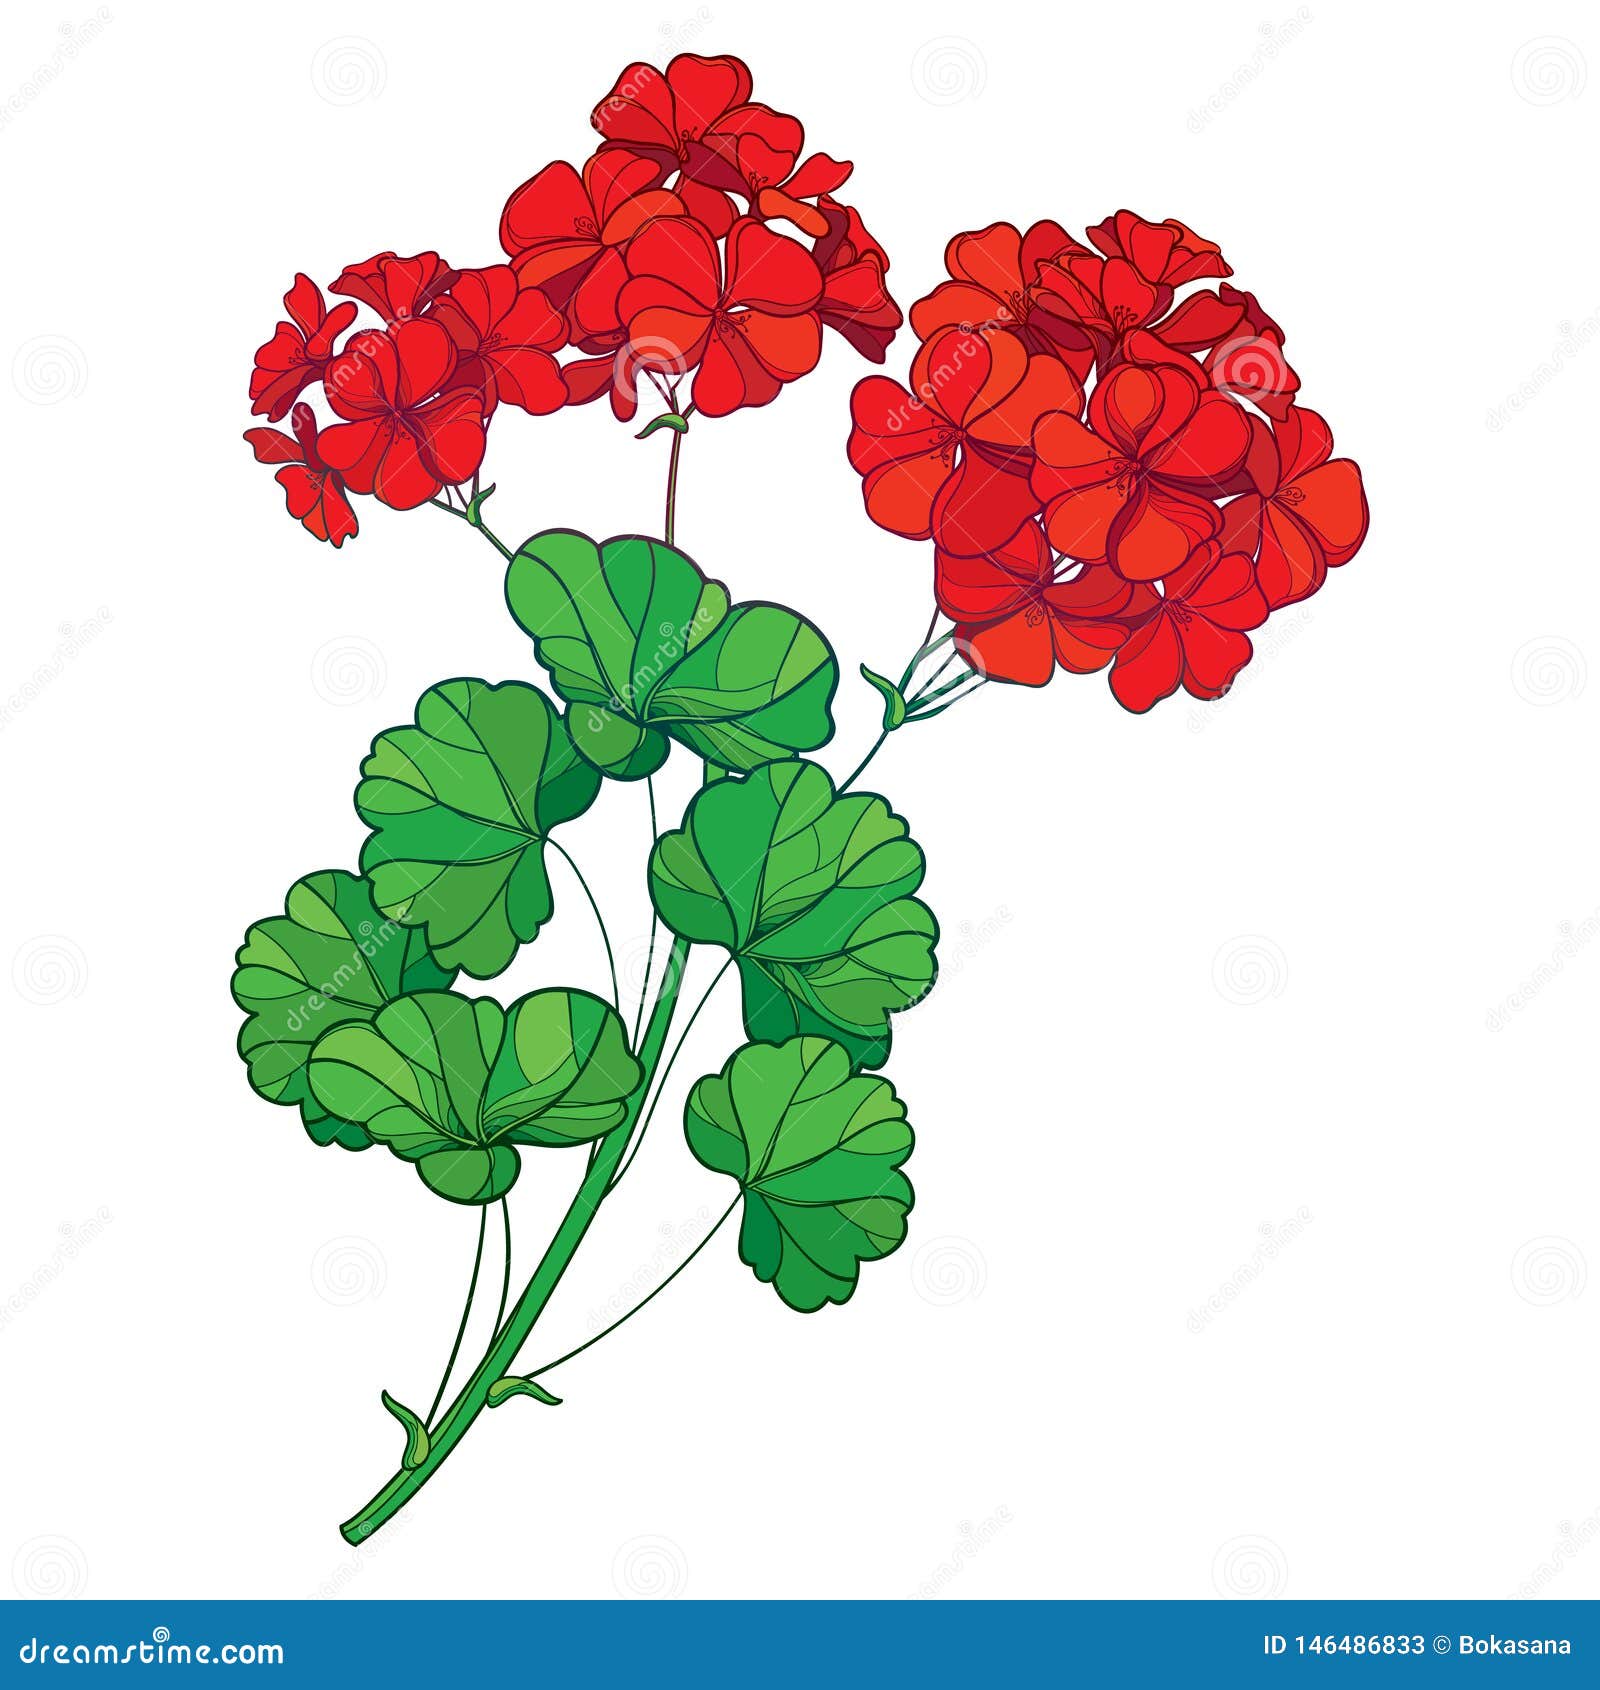  branch with outline red geranium or cranesbills flower bunch and ornate green leaf  on white background.